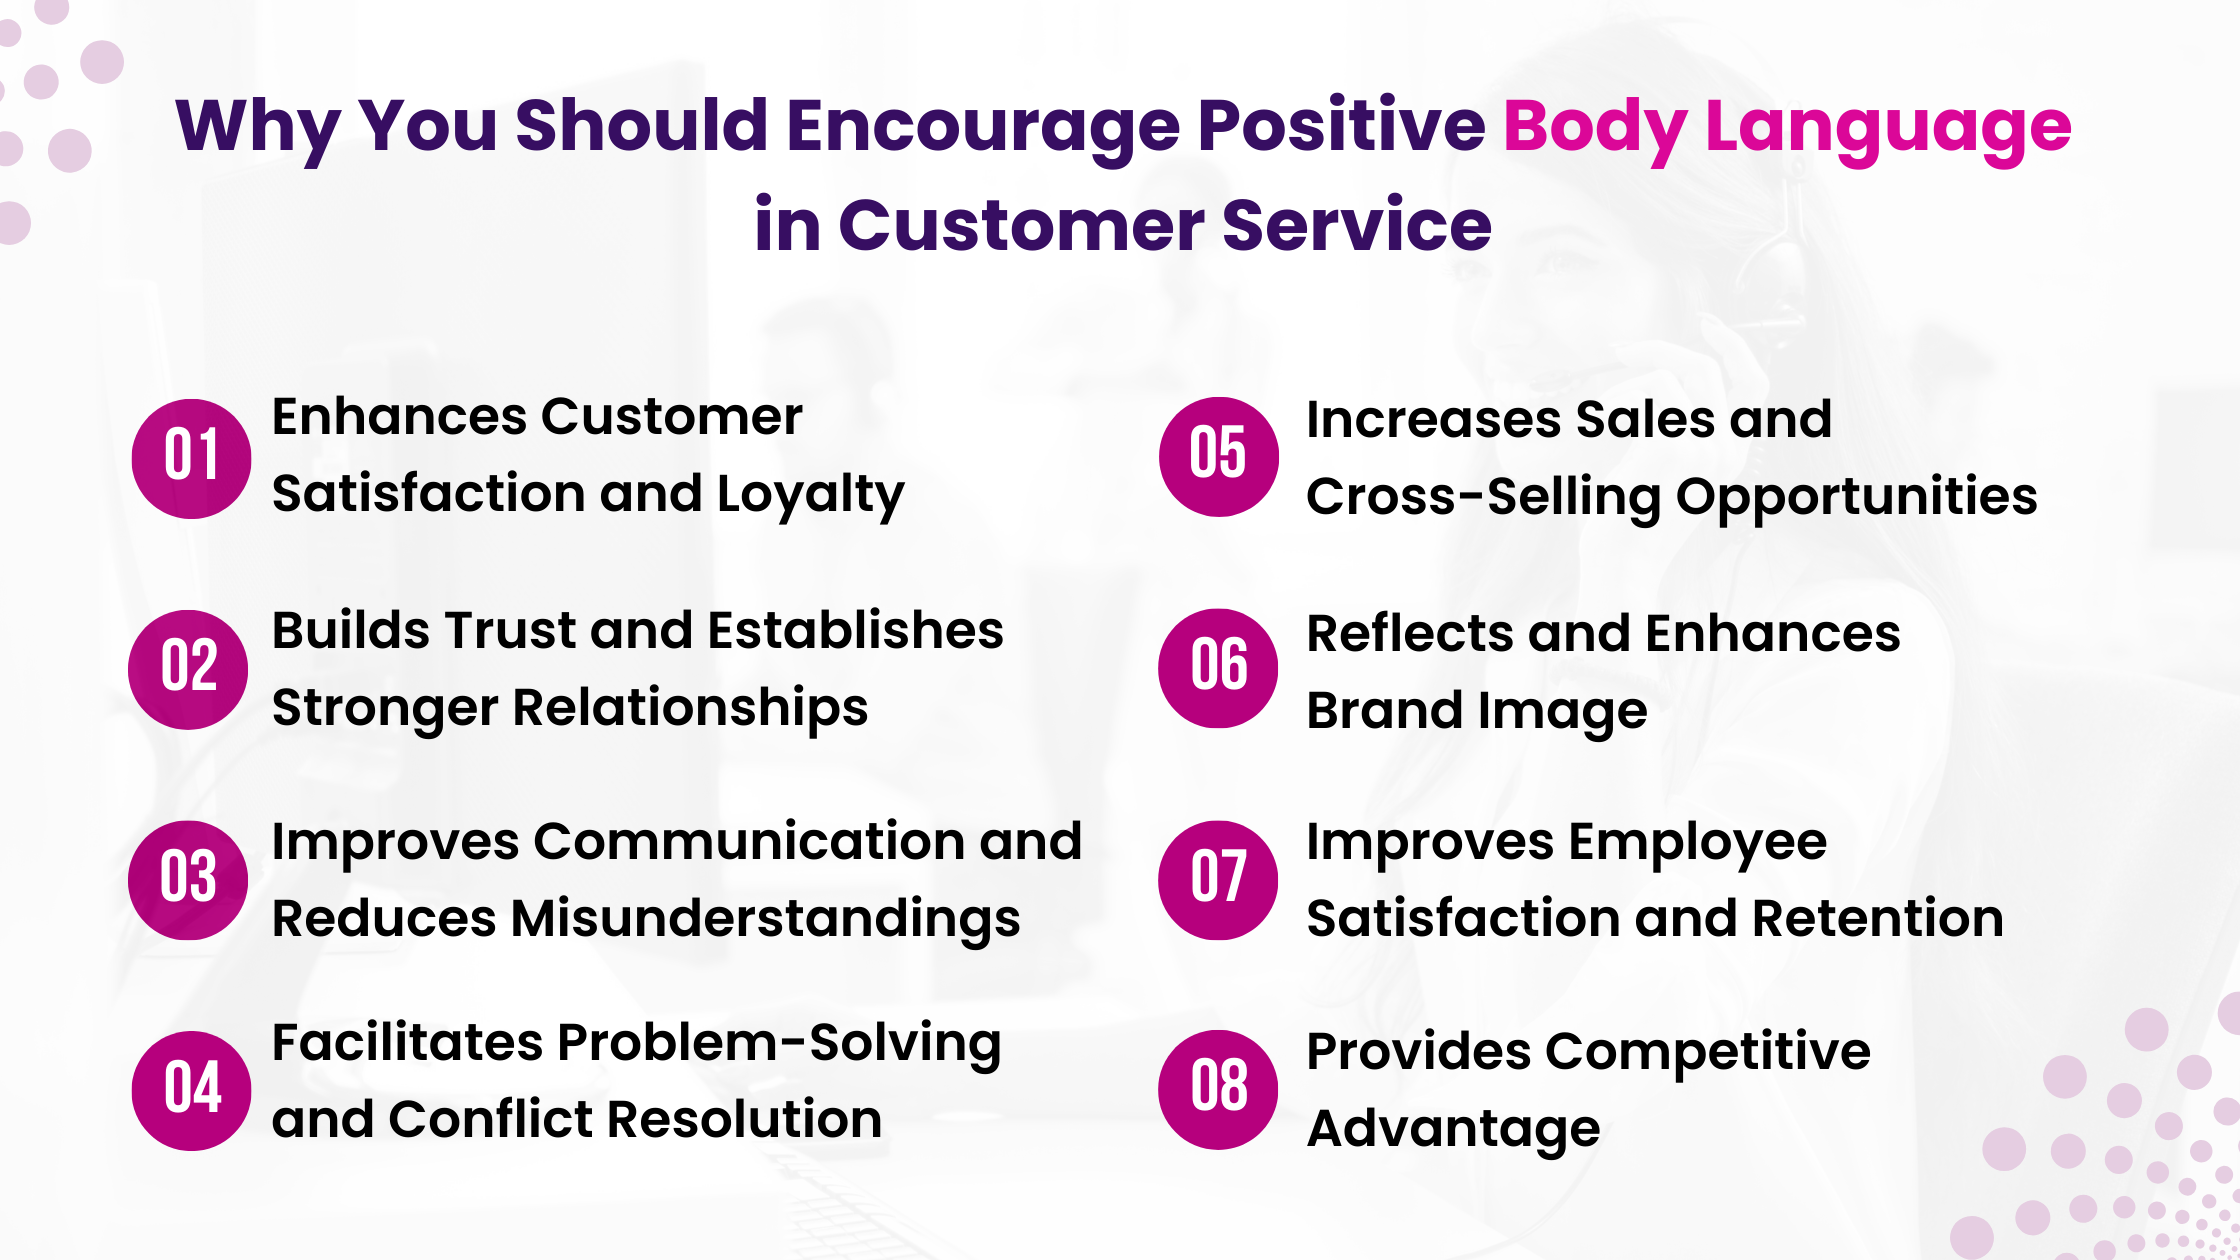 Why You Should Encourage Positive Body Language in Customer Service